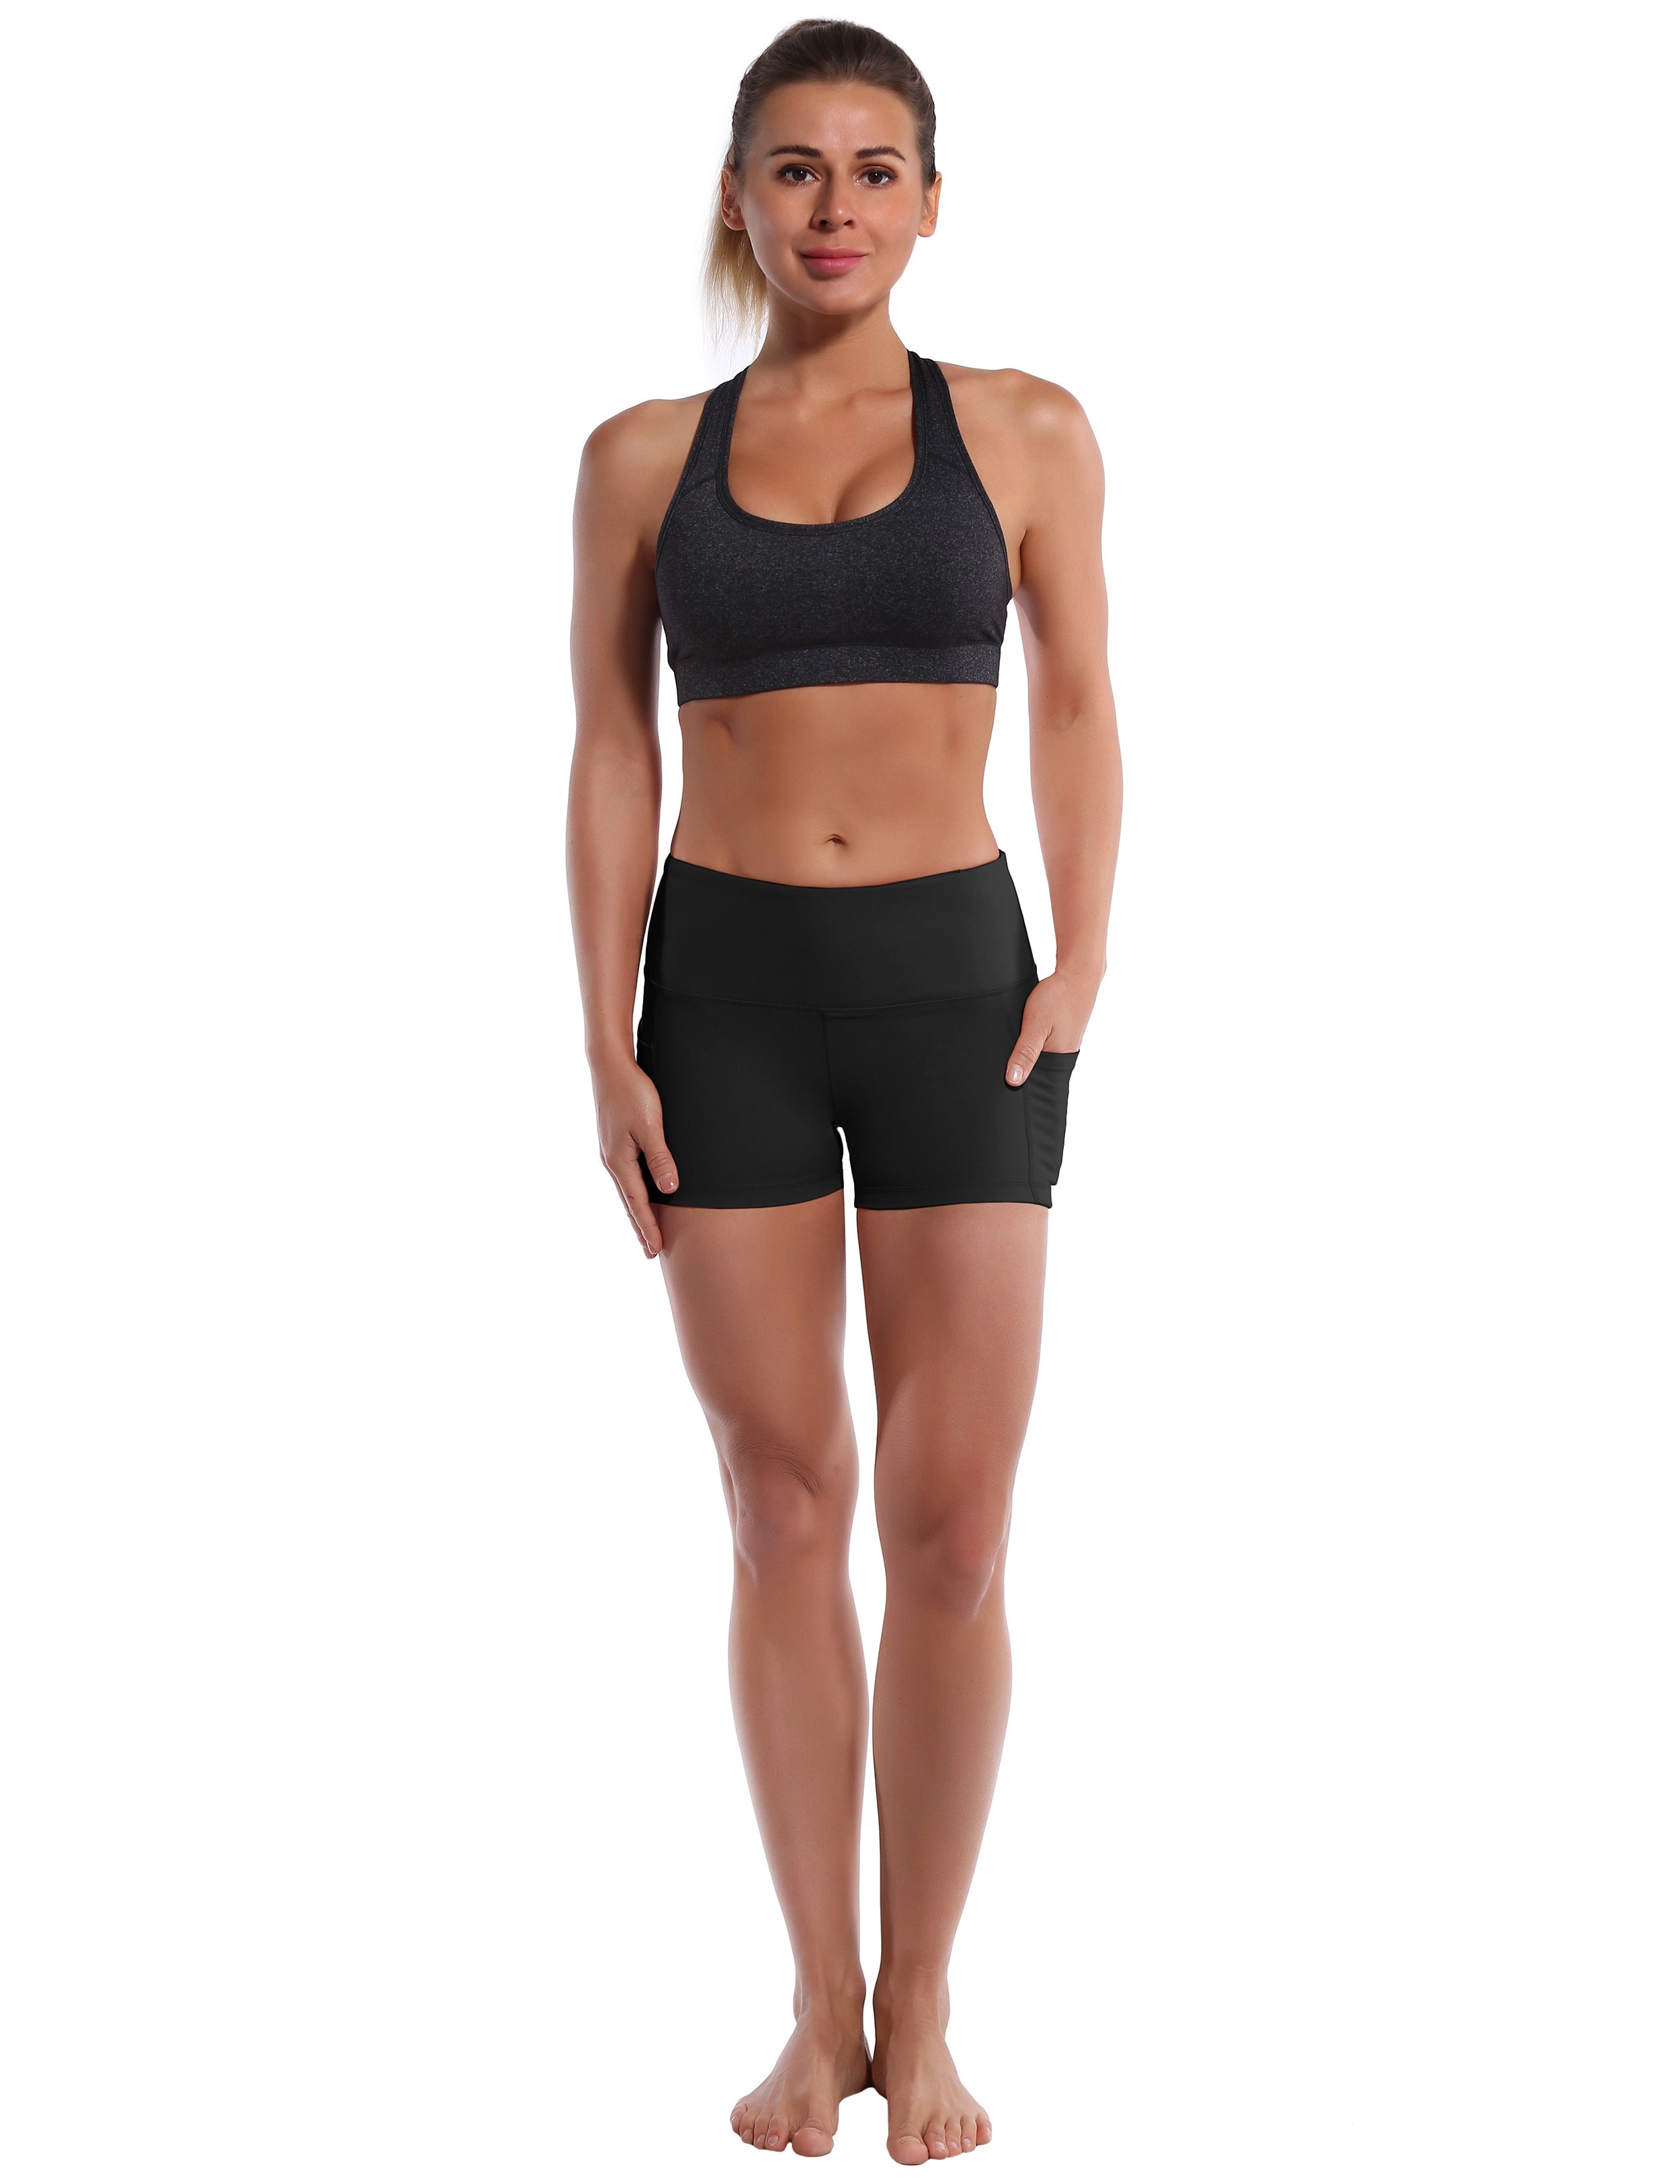 2.5" Side Pockets Golf Shorts black Sleek, soft, smooth and totally comfortable: our newest sexy style is here. Softest-ever fabric High elasticity High density 4-way stretch Fabric doesn't attract lint easily No see-through Moisture-wicking Machine wash 78% Polyester, 22% Spandex